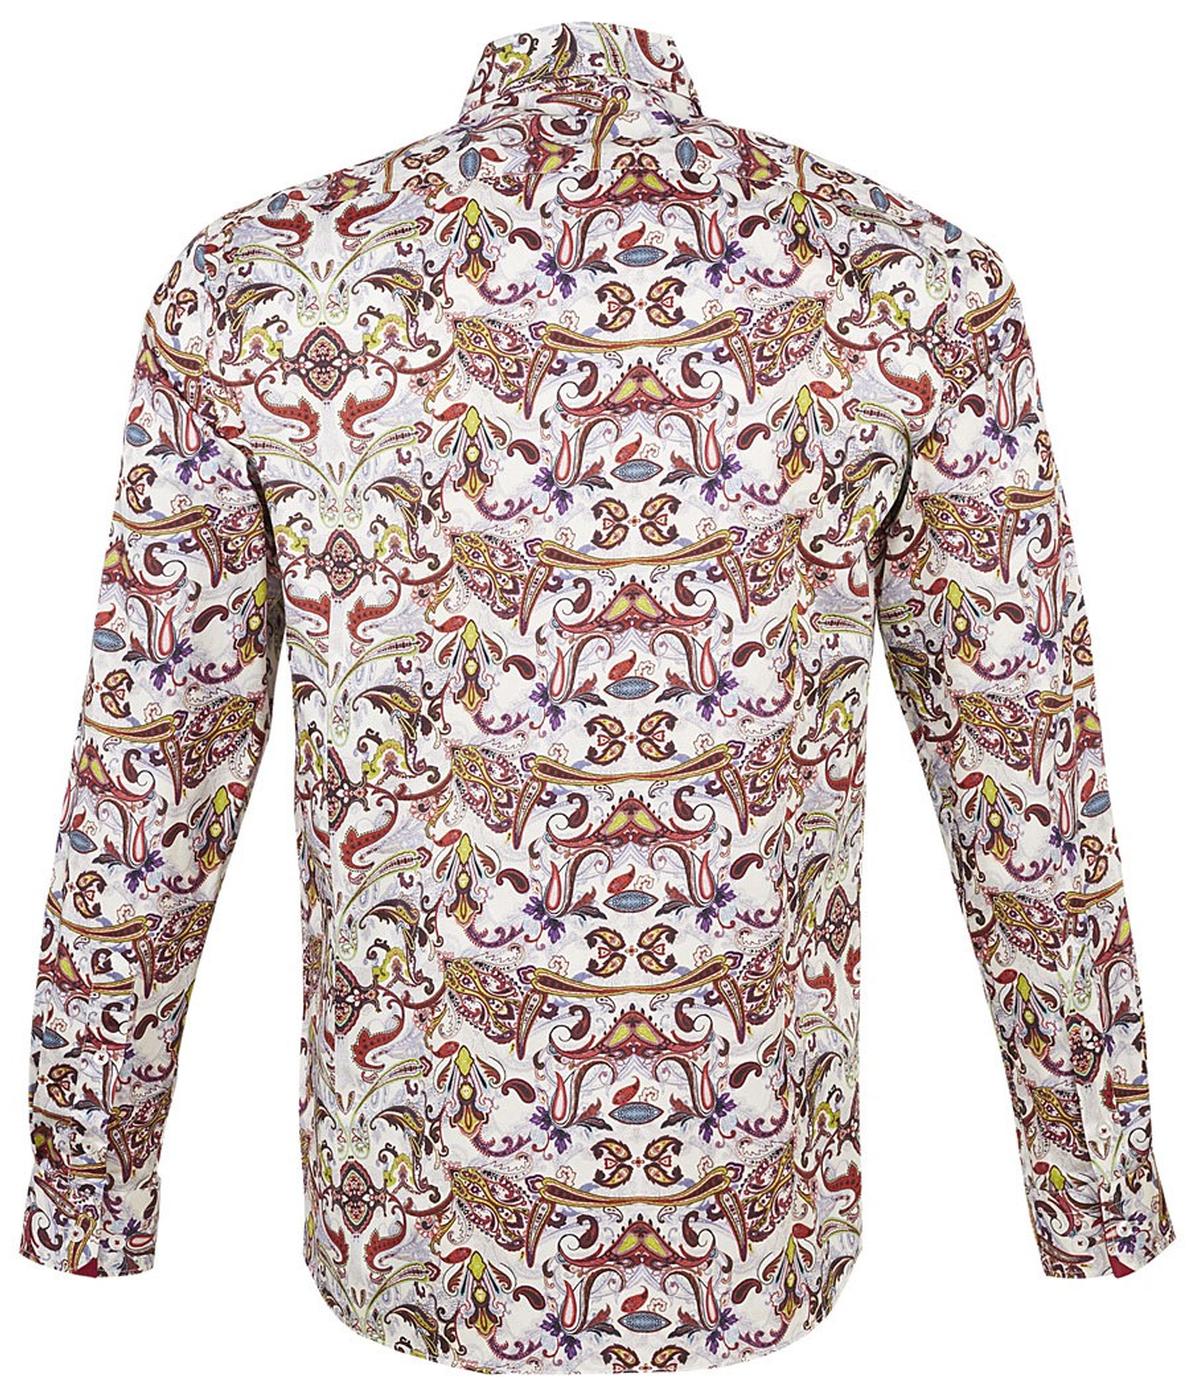 GUIDE LONDON Retro 60s Psychedelic Paisley Mod Dress Shirt